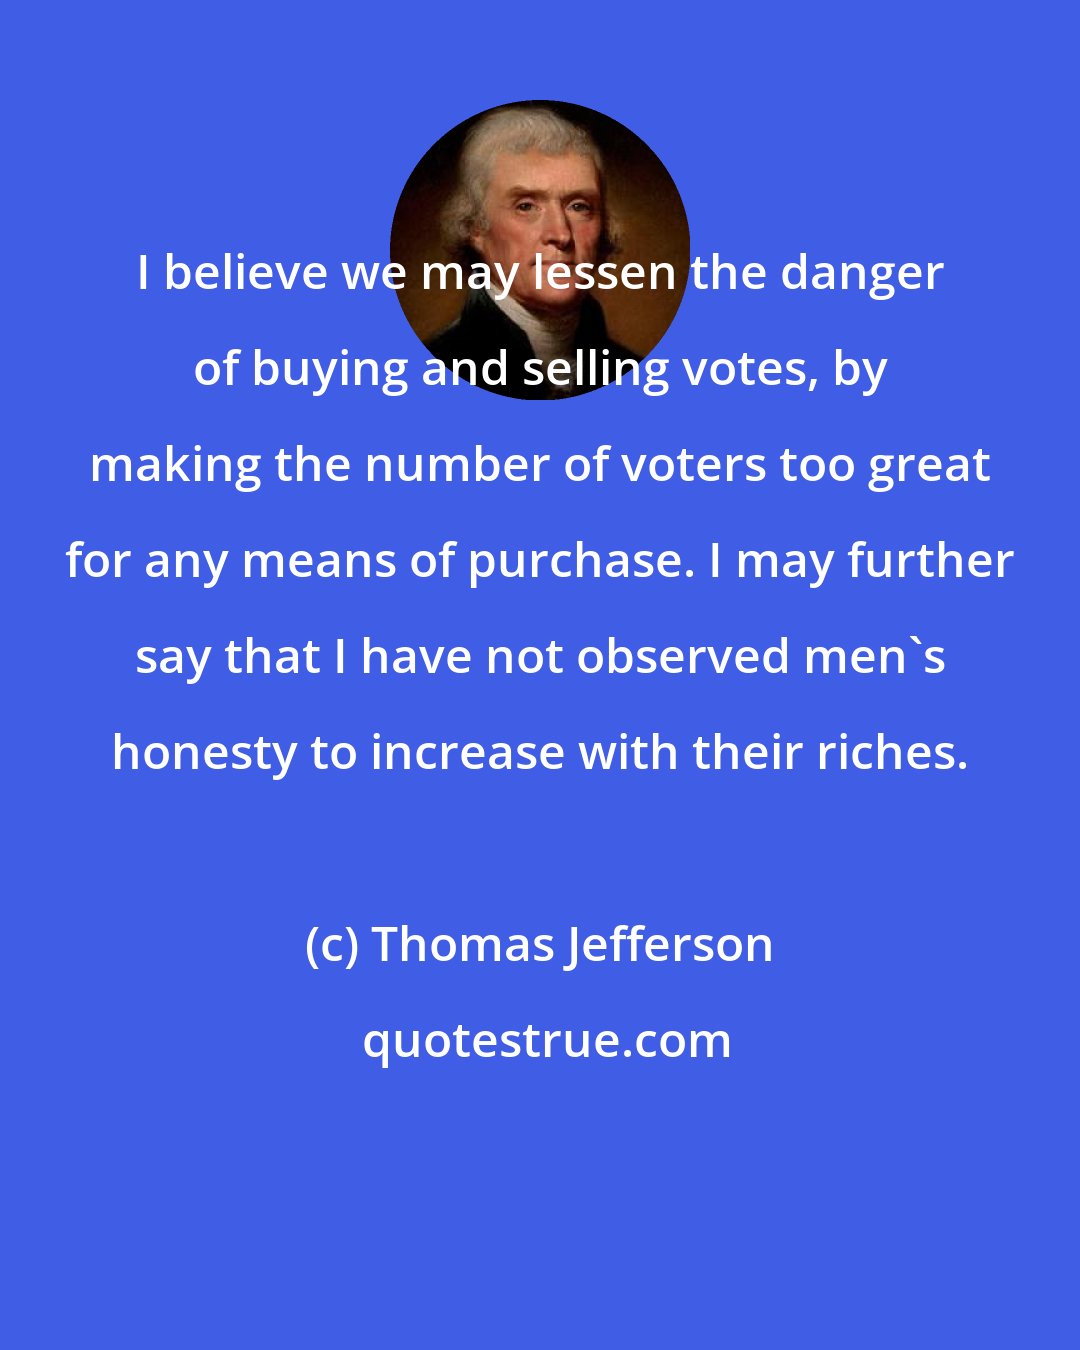 Thomas Jefferson: I believe we may lessen the danger of buying and selling votes, by making the number of voters too great for any means of purchase. I may further say that I have not observed men's honesty to increase with their riches.